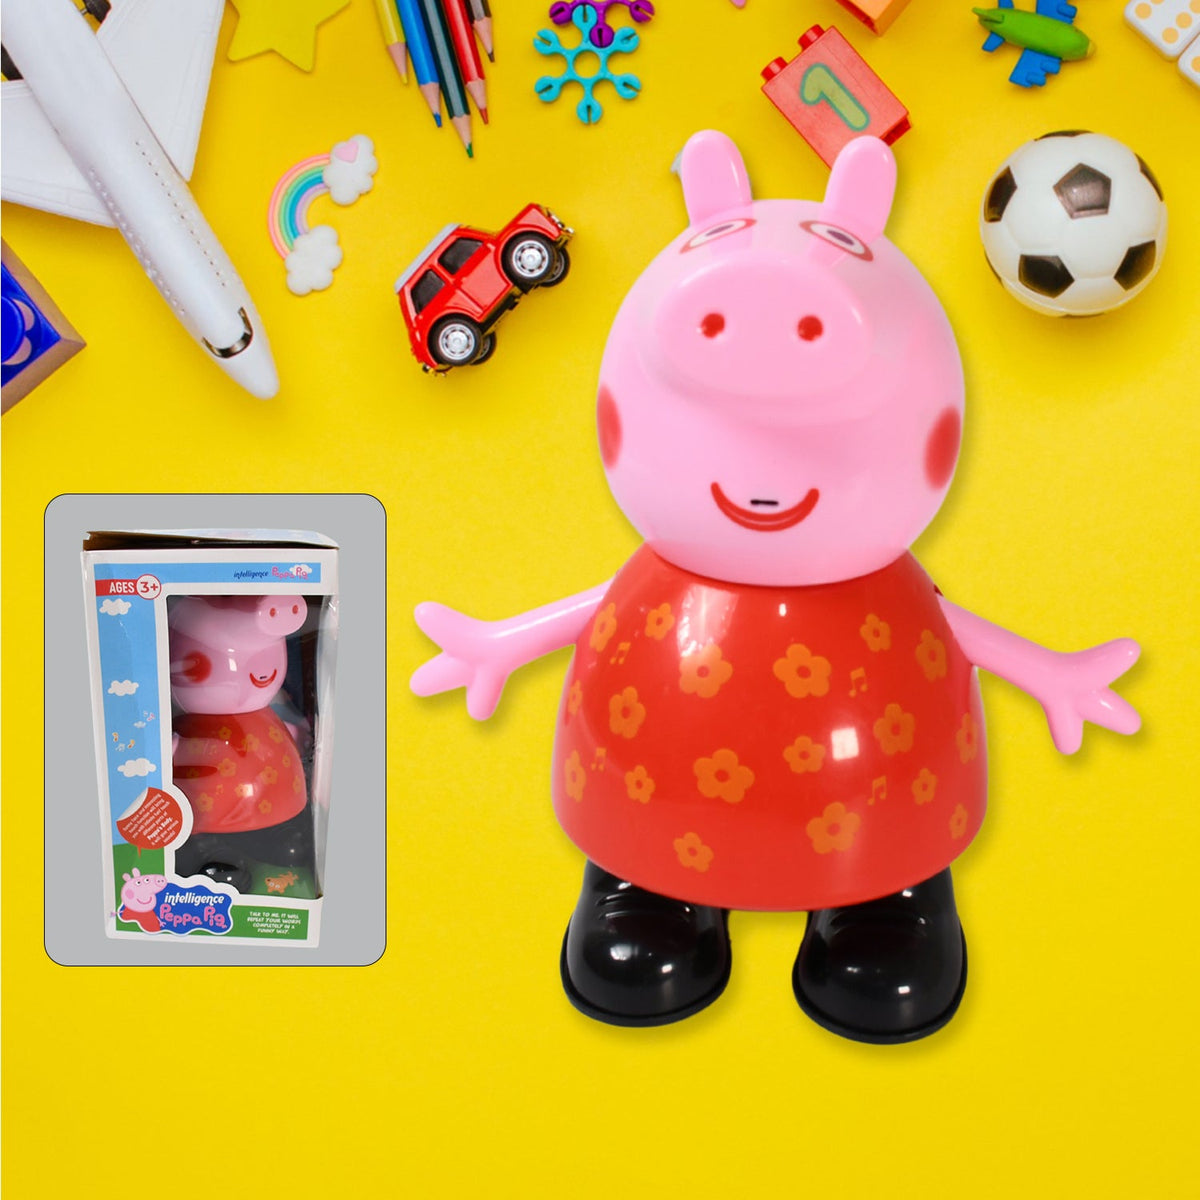 17926 Pig Children Play toy, Pretend Play Toy Fun Gift for Kids, Movable Hands, Legs Pig Pretend Play Toy Set for Kids Children with Soft Rubber Material (1 Pc / Battery Not included)